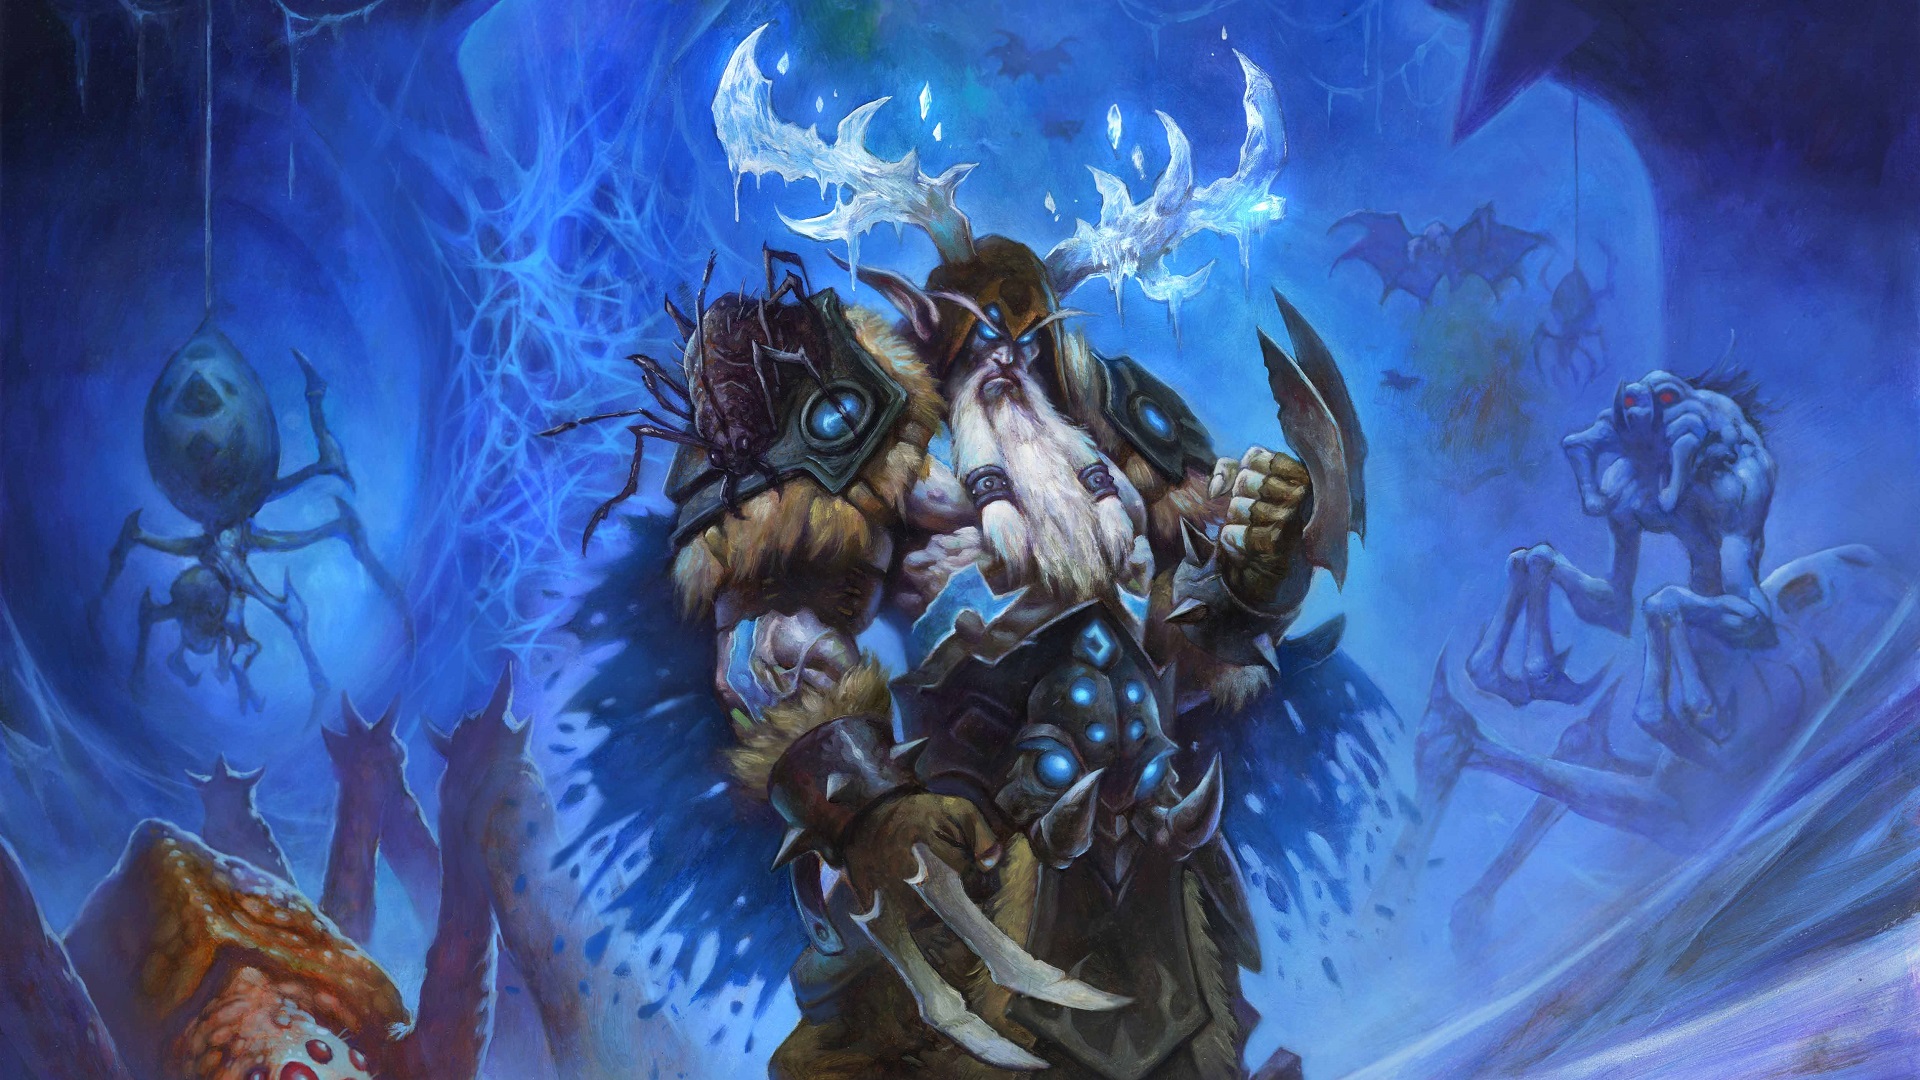 Malfurion, Hearthstone: Heroes of Warcraft, Hearthstone, Warcraft, Cards, Artwork, Knights of the frozen throne, Death Knight, Video games Wallpaper